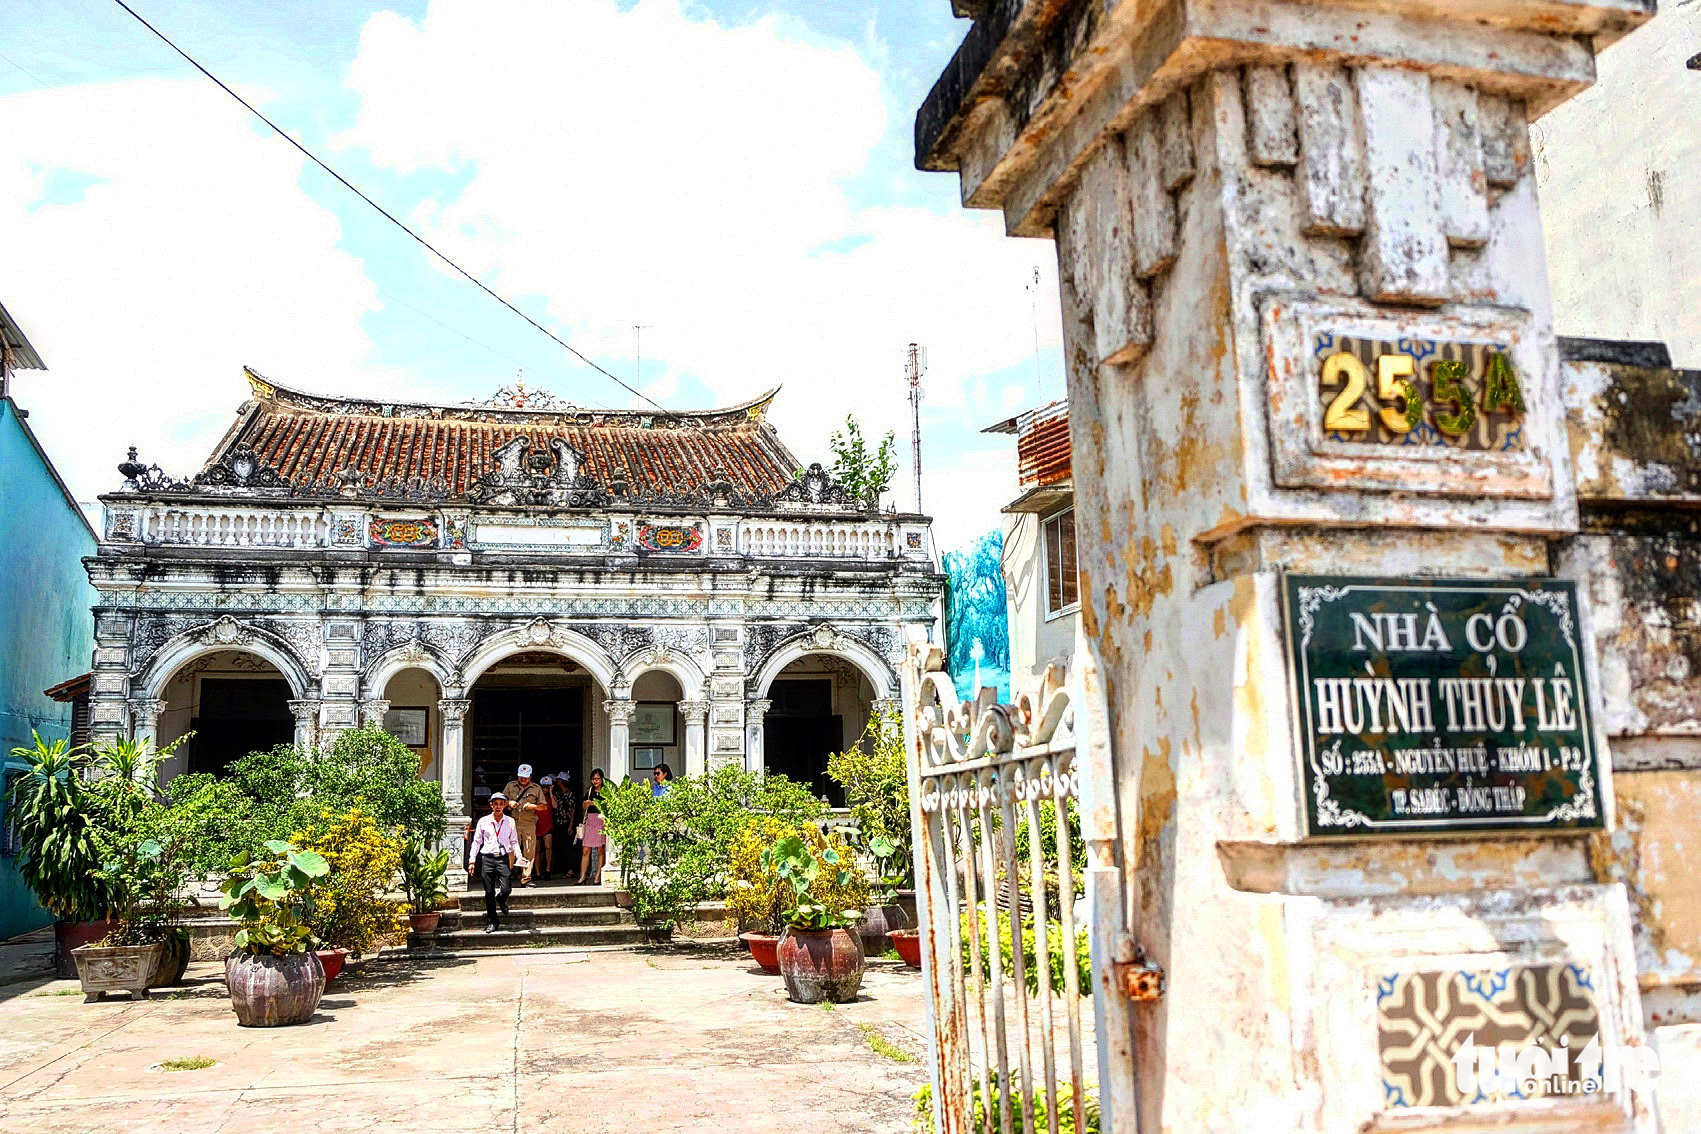 Huynh Thuy Le ancient house in Sa Dec City, Dong Thap Province, Vietnam. Photo: Gia Tien / Tuoi Tre